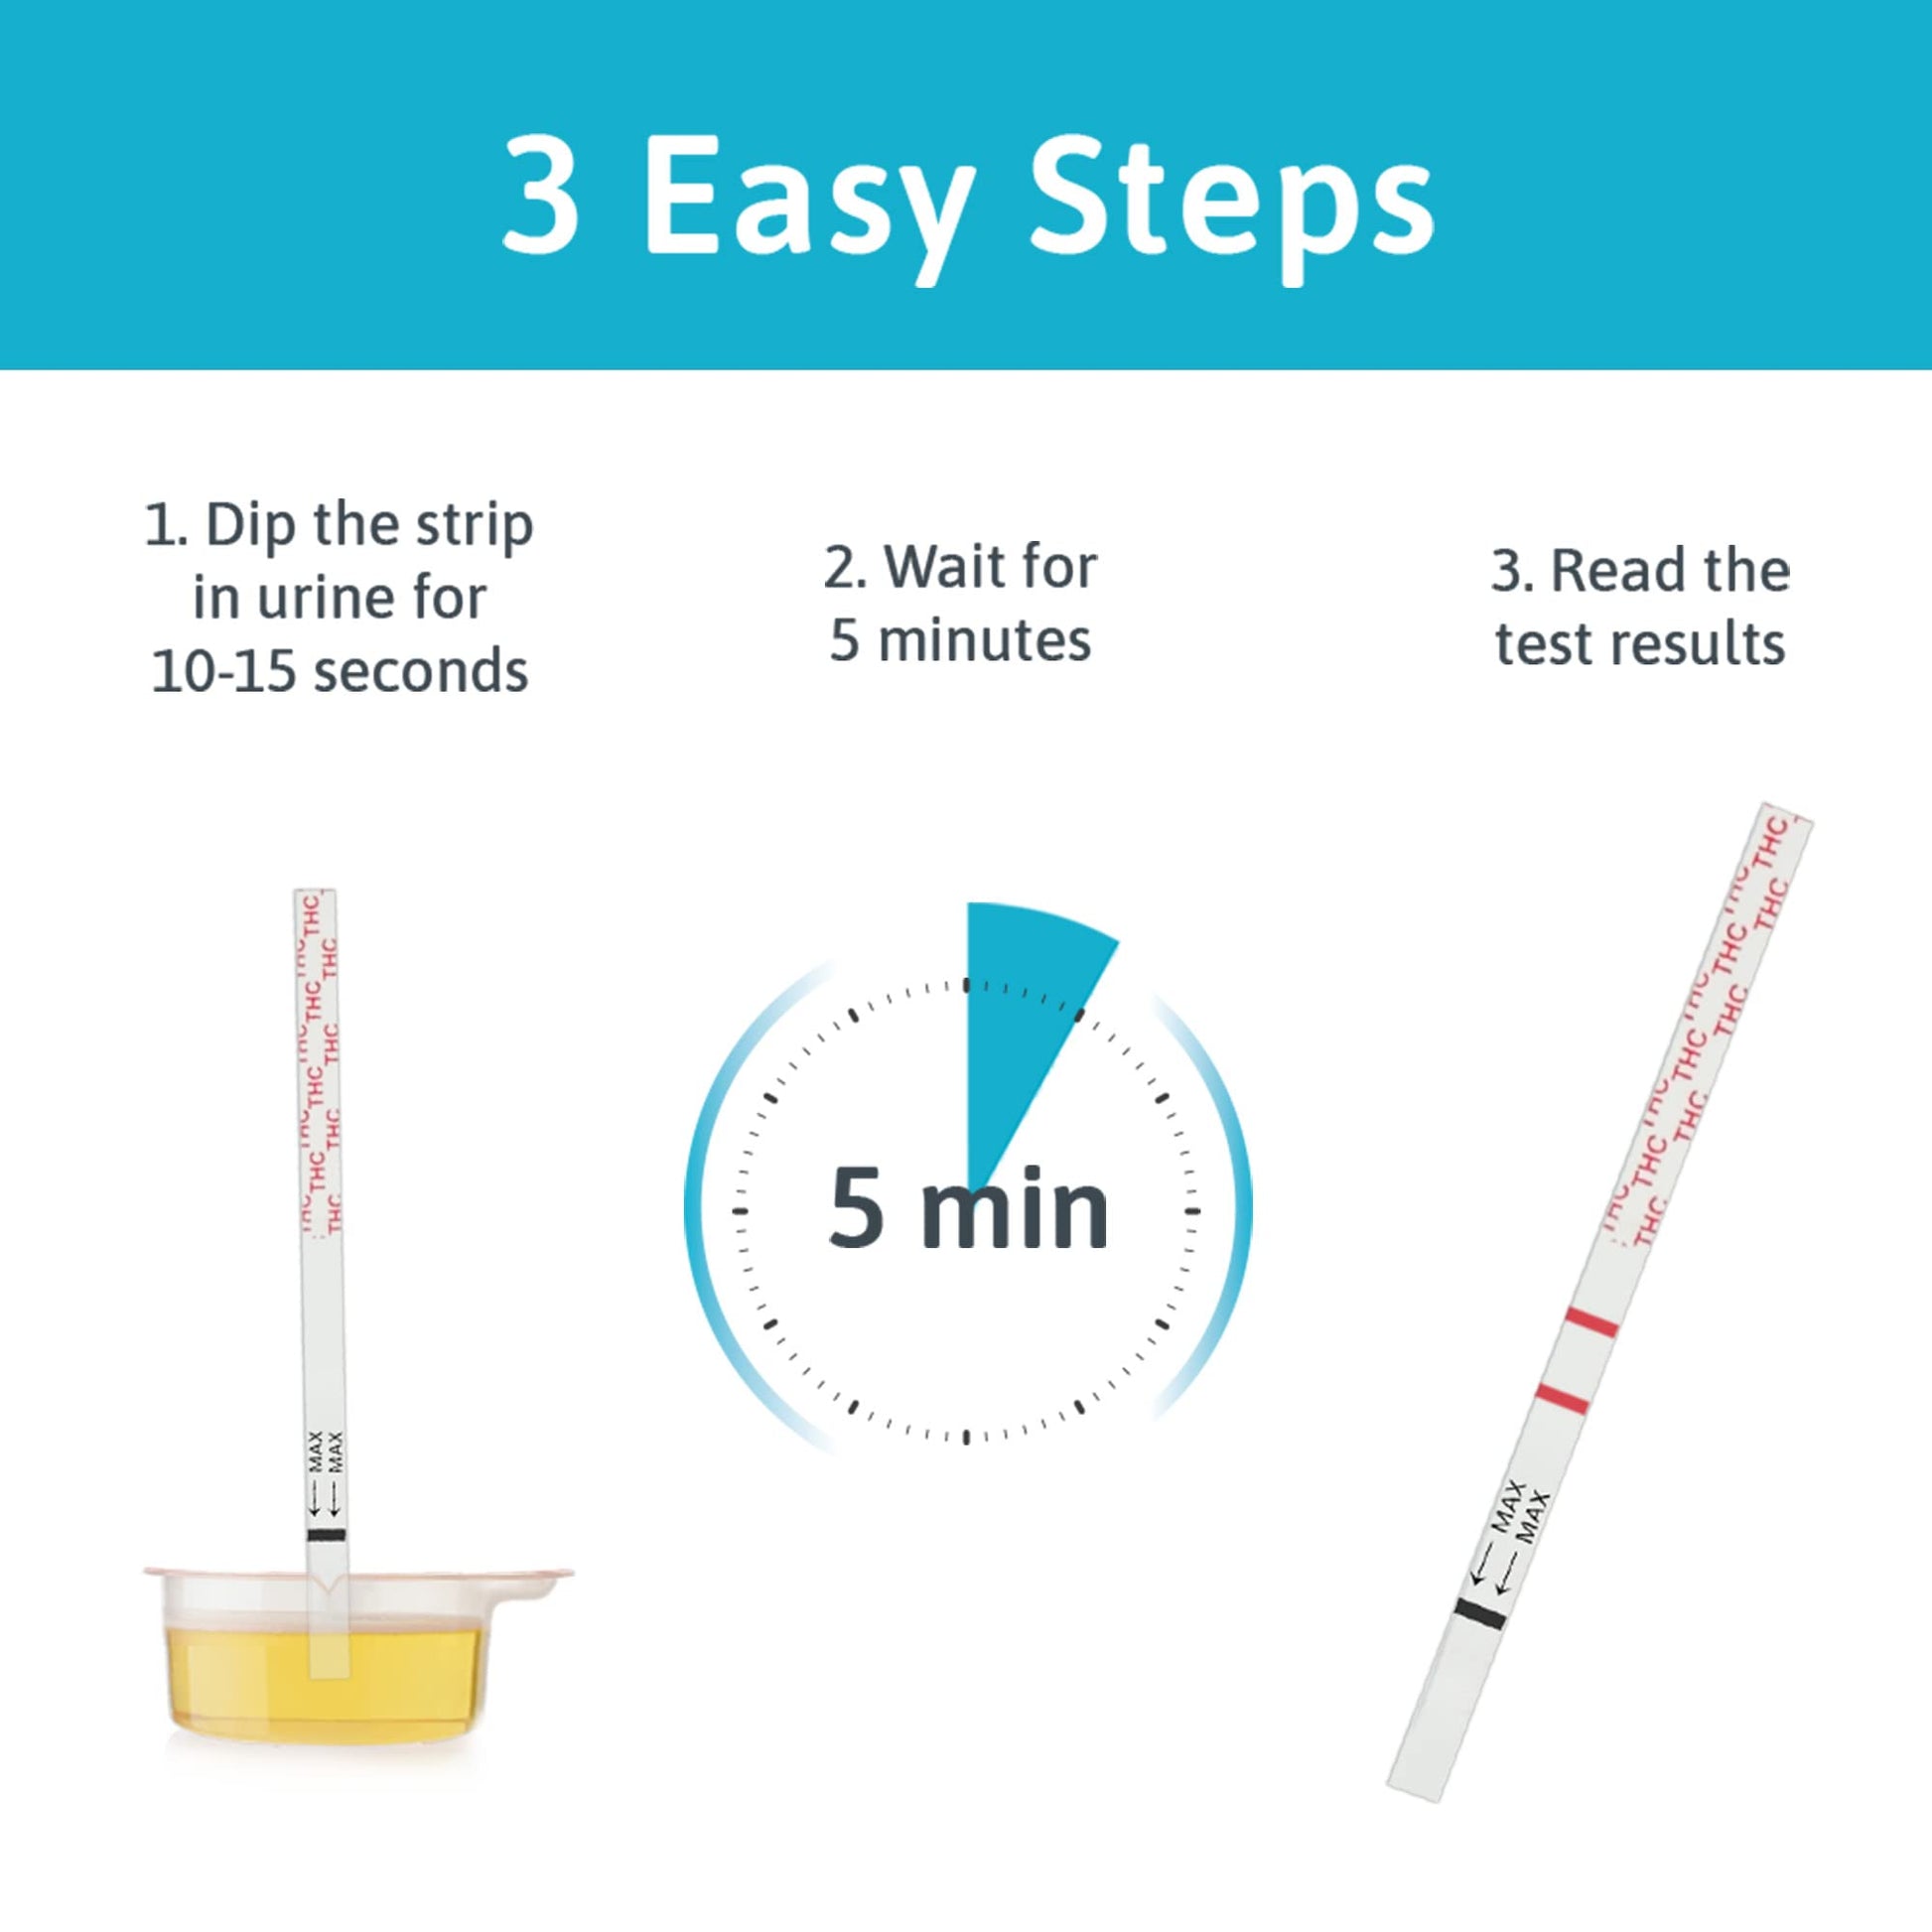 Illustrative image depicting the three easy steps of conducting a urine drug test: '1. Collect urine sample,' '2. Dip test strip into the sample,' and '3. Read results after a few minutes